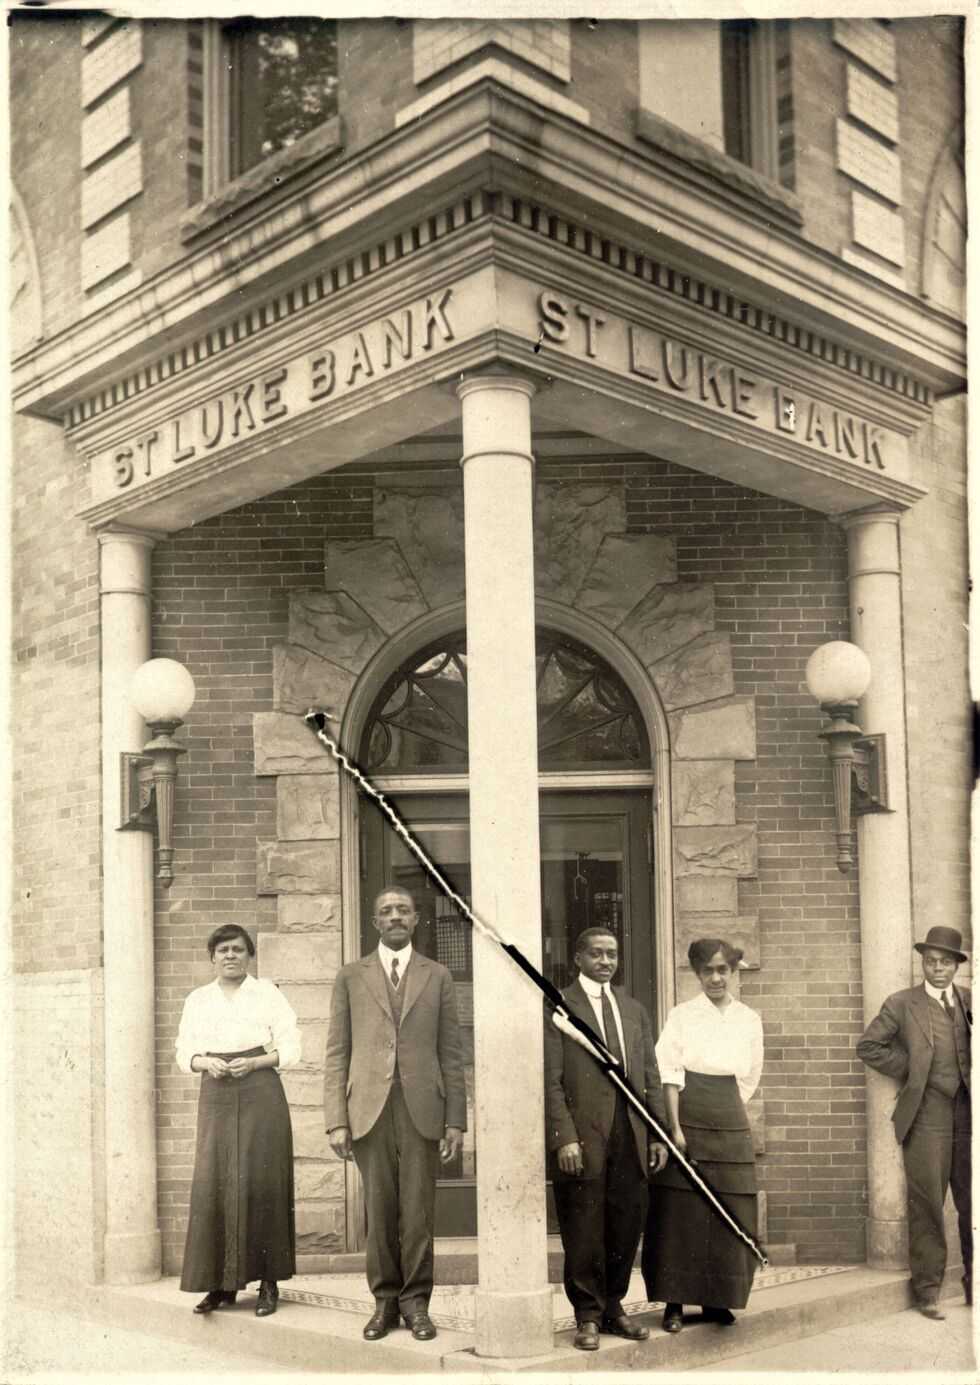 Photograph of employees at the entrance St Luke Bank